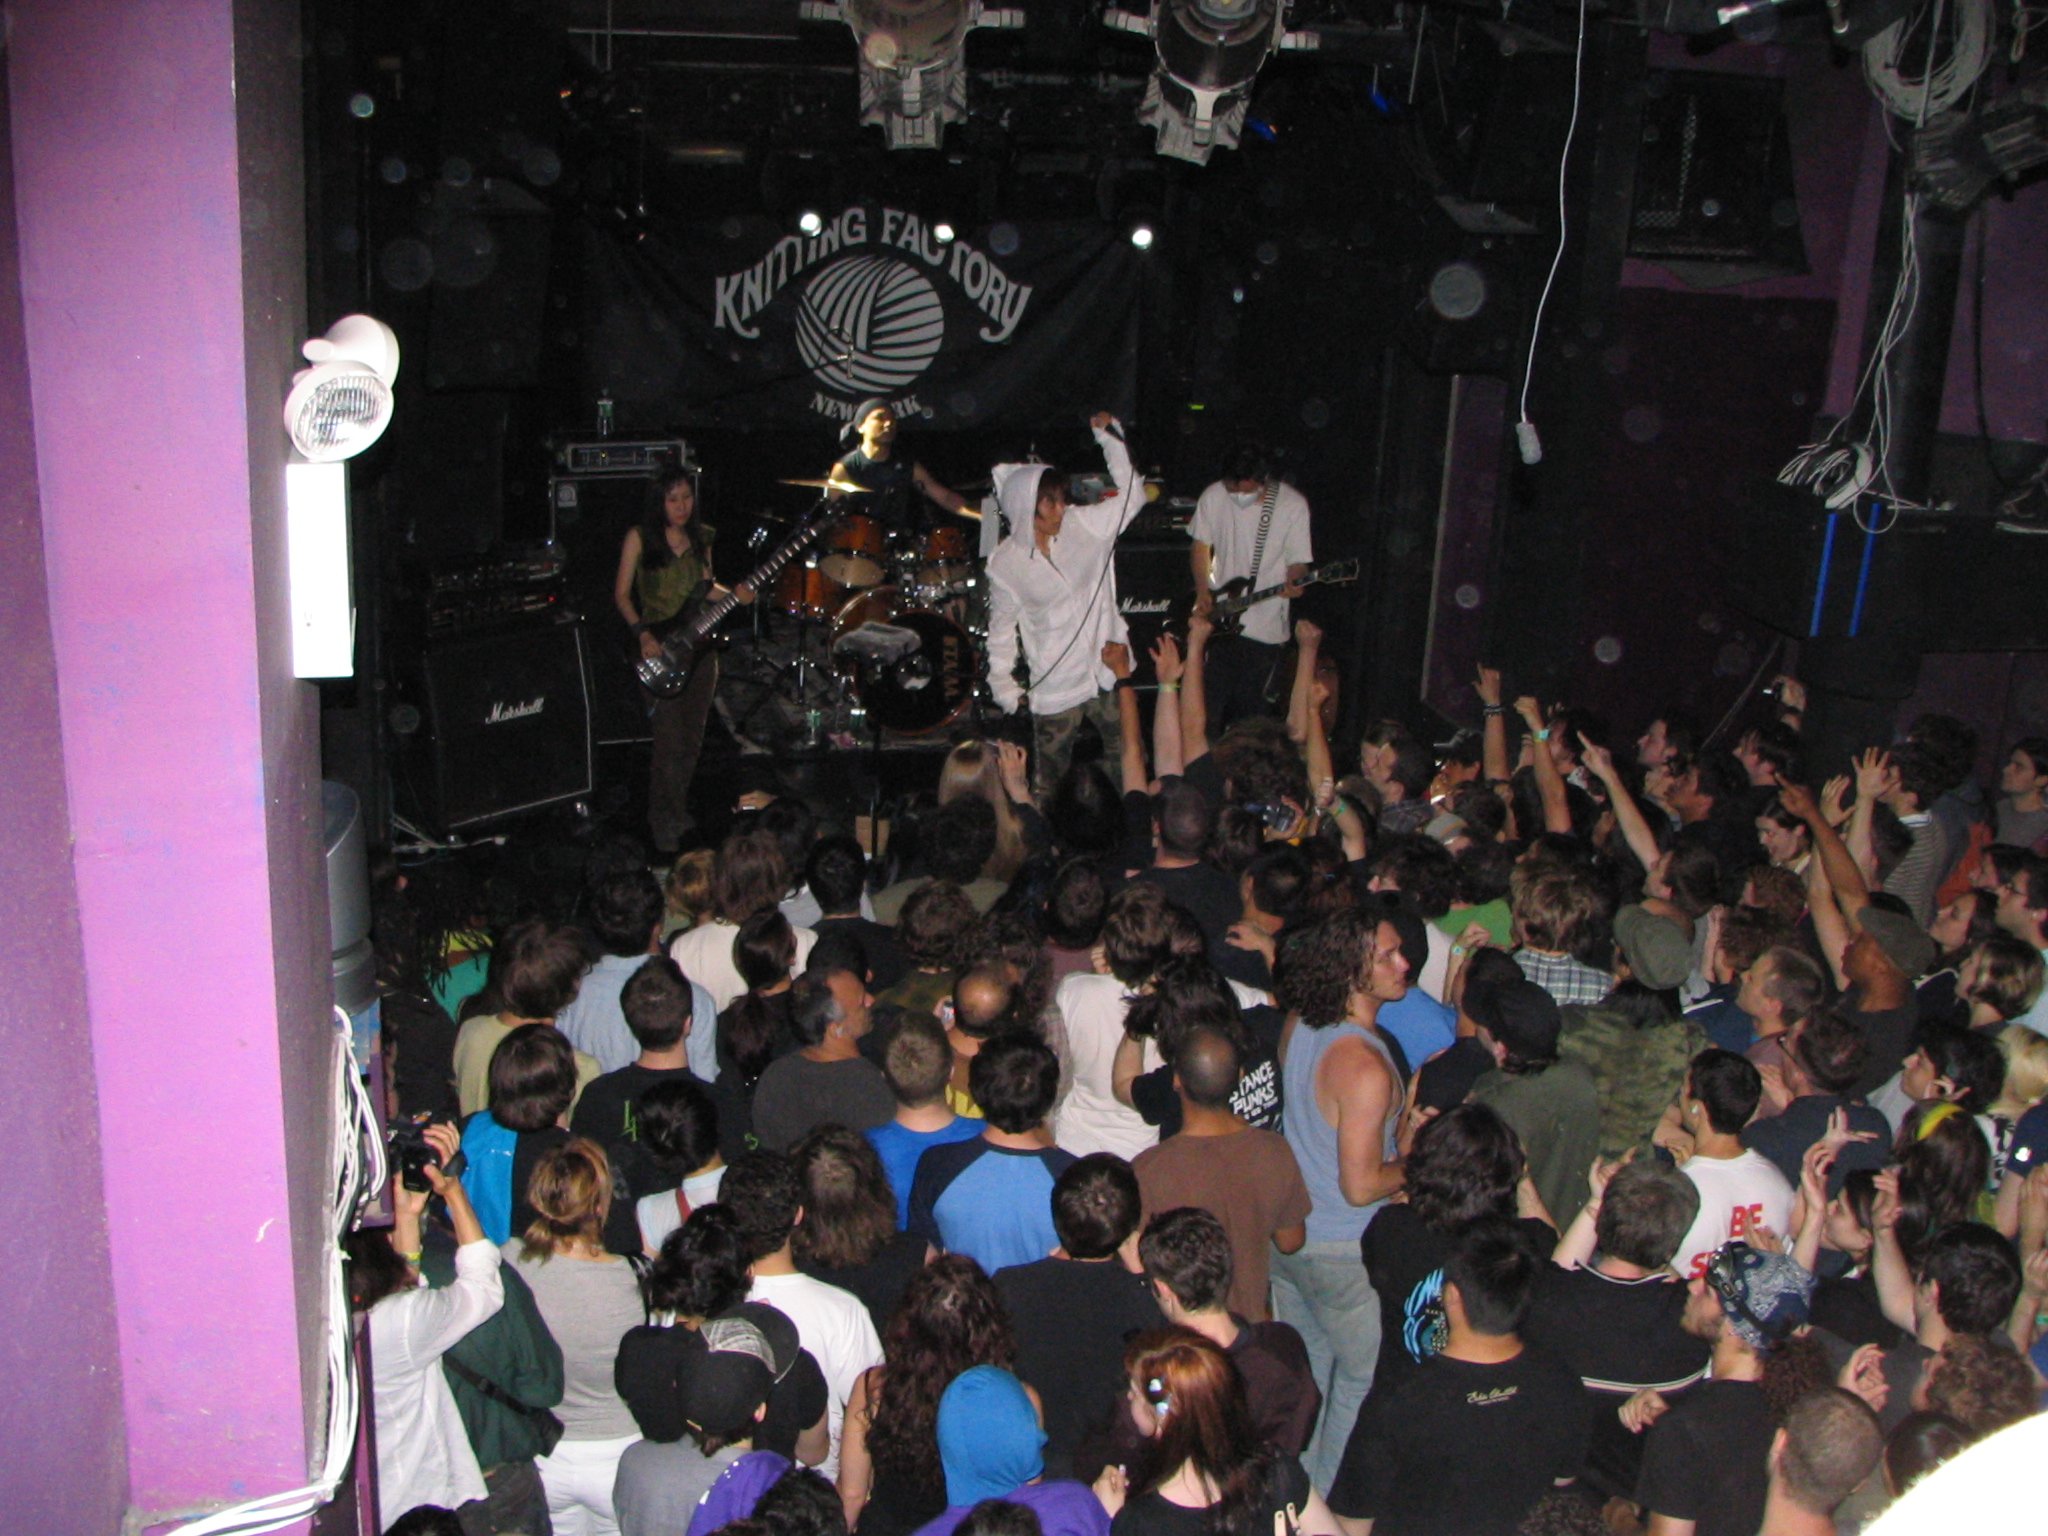 image for venue Knitting Factory Brooklyn